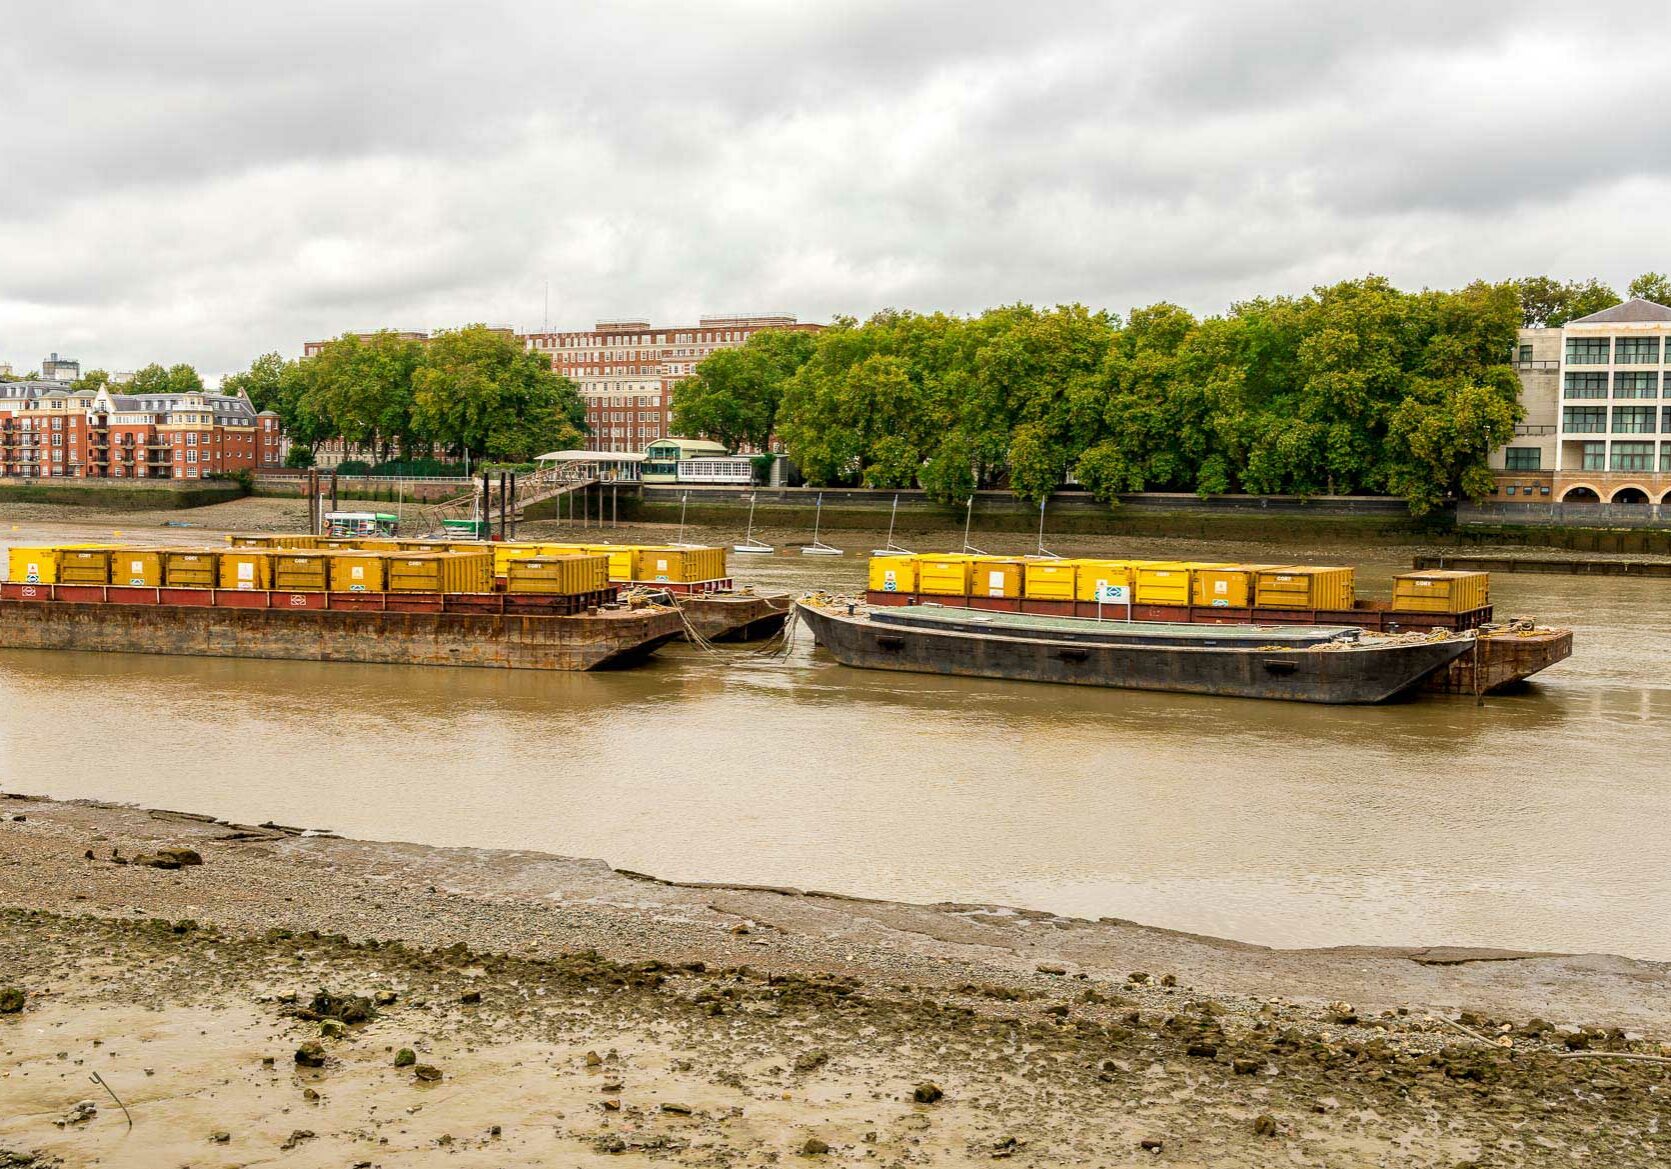 Dirty shores of the river Thames in London, and barges loaded with containers